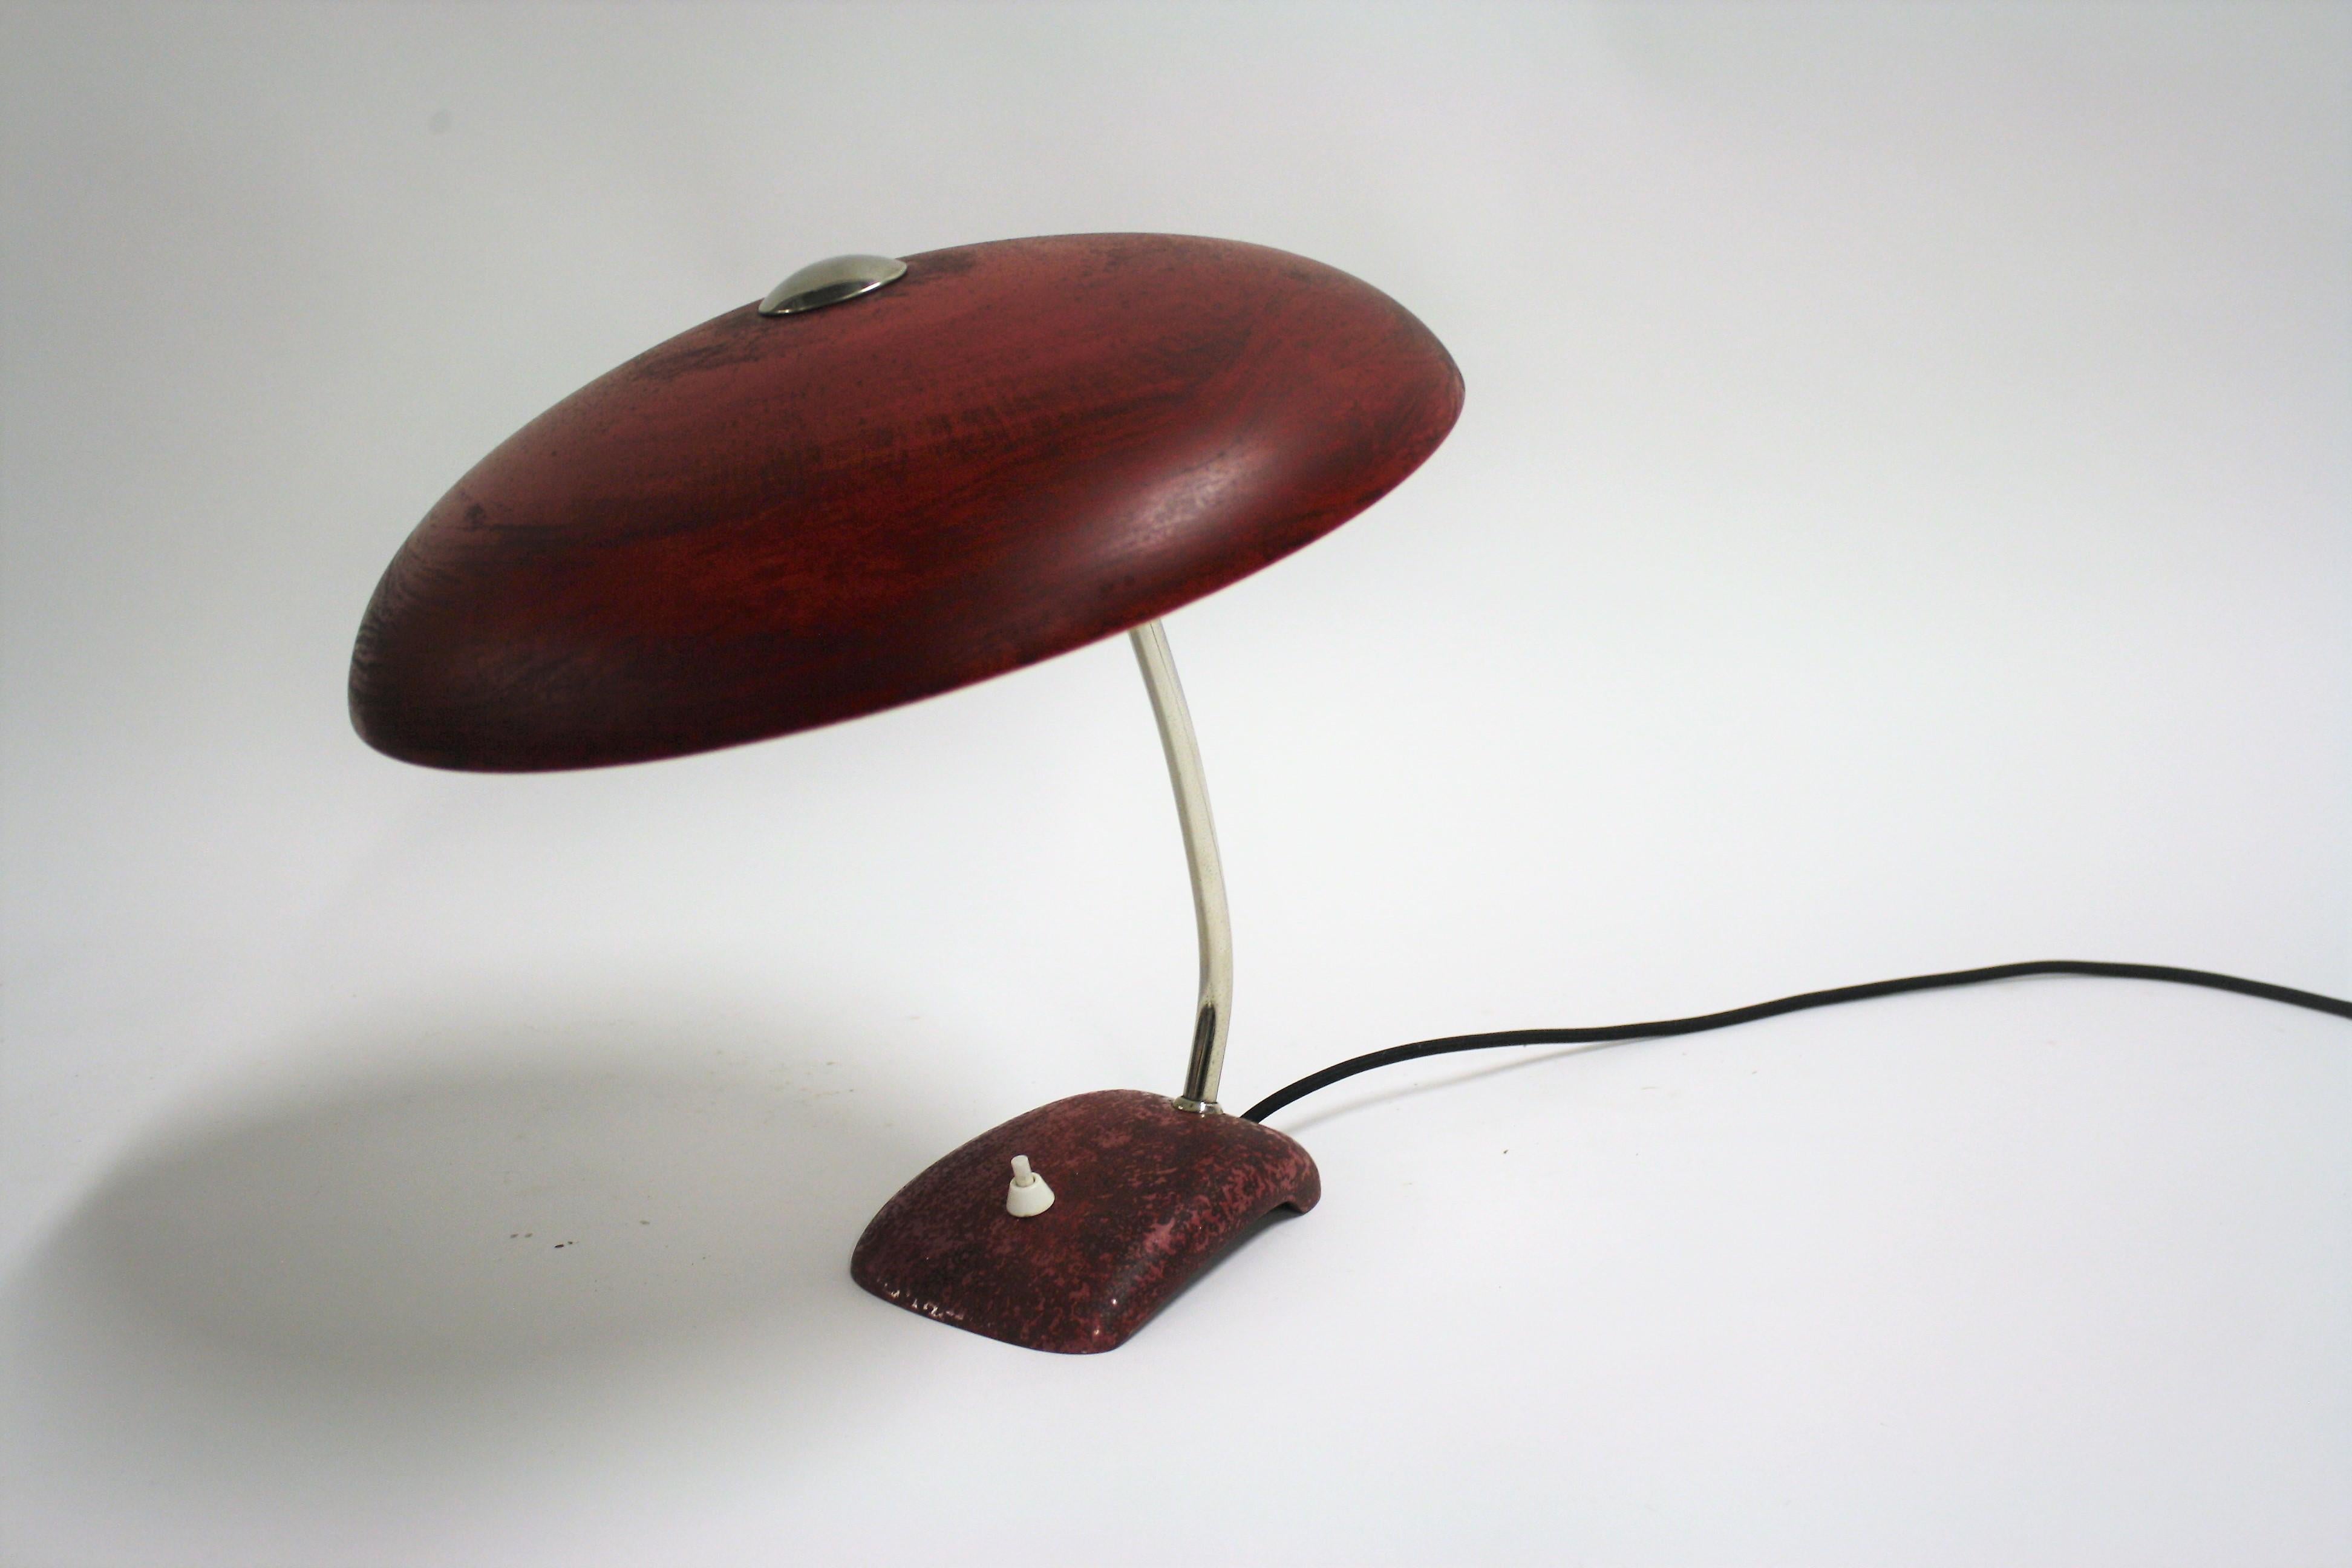 Charming Bauhaus style articulated desk lamp with a patinated cast iron base.

The shade is in original condition and adjustable.

Tested and ready to use with a E26/E27 light bulb.

Original condition with patina, rewired.

France,